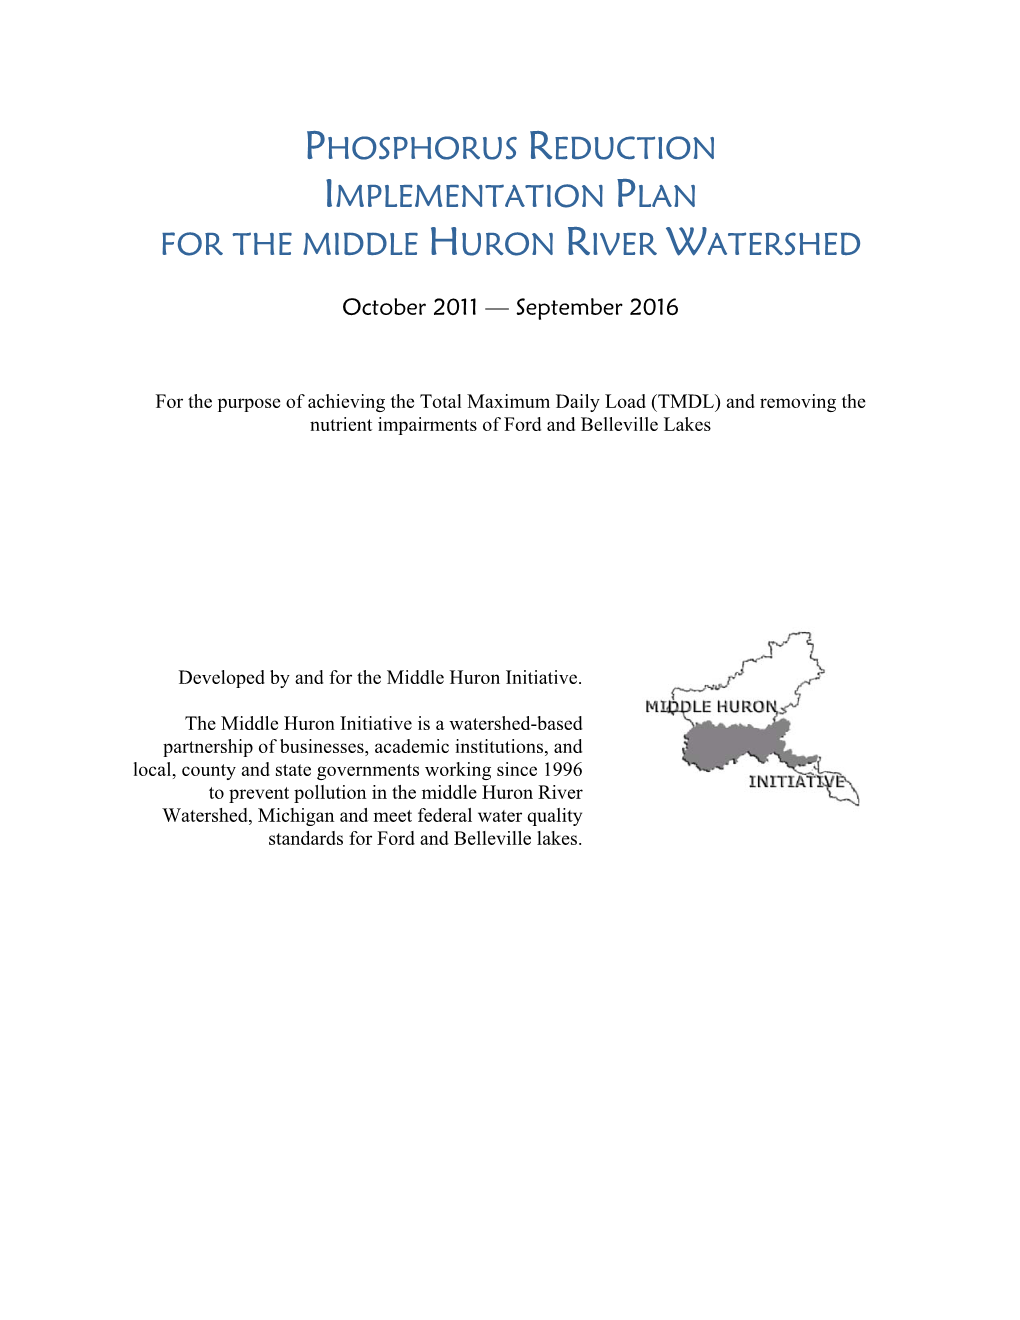 Phosphorus Reduction Implementation Plan for the Middle Huron River Watershed